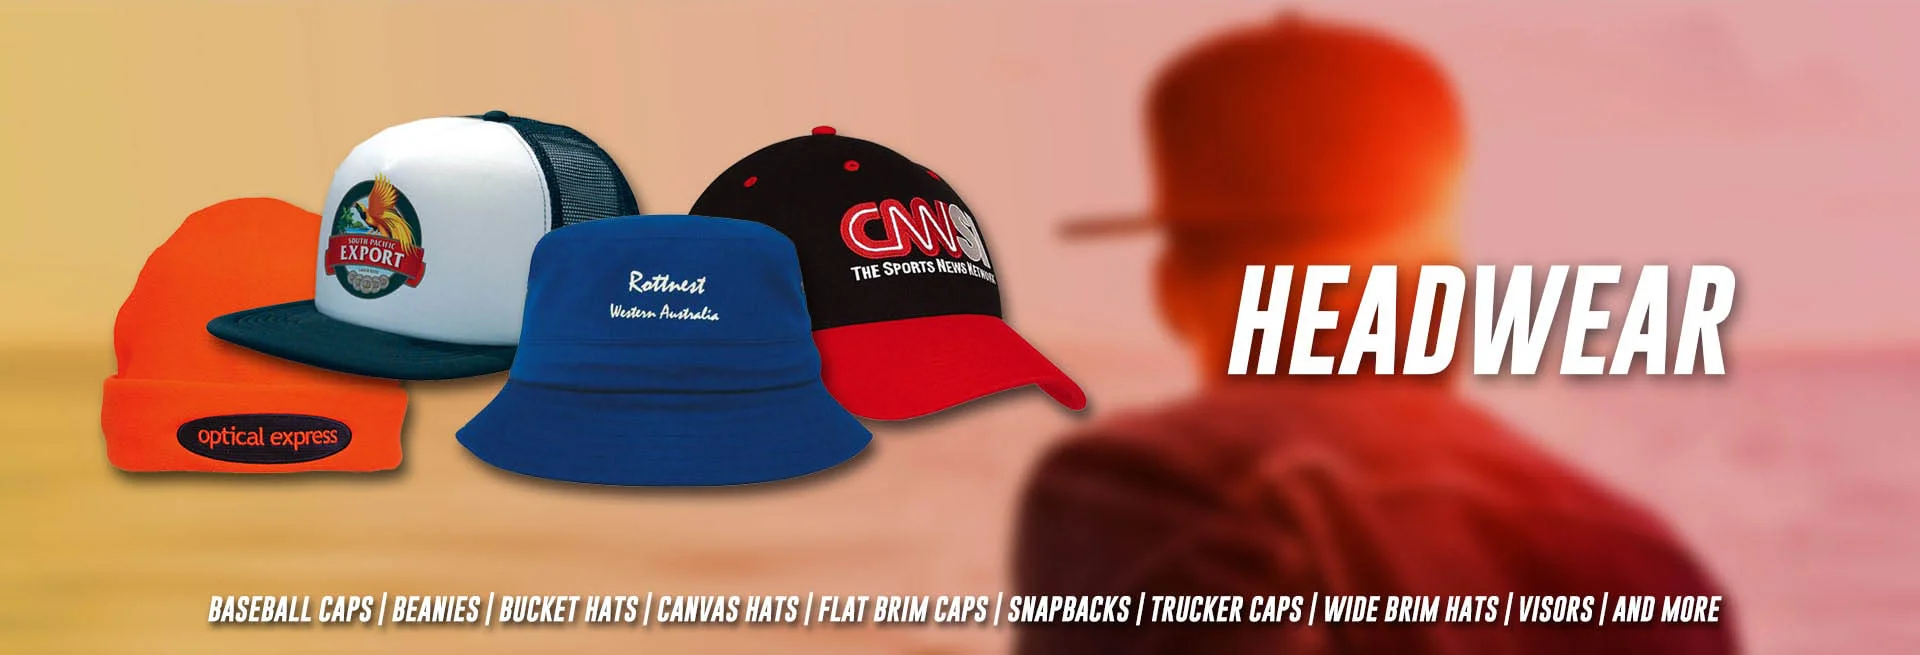 Headwears - Mad Dog Promotions